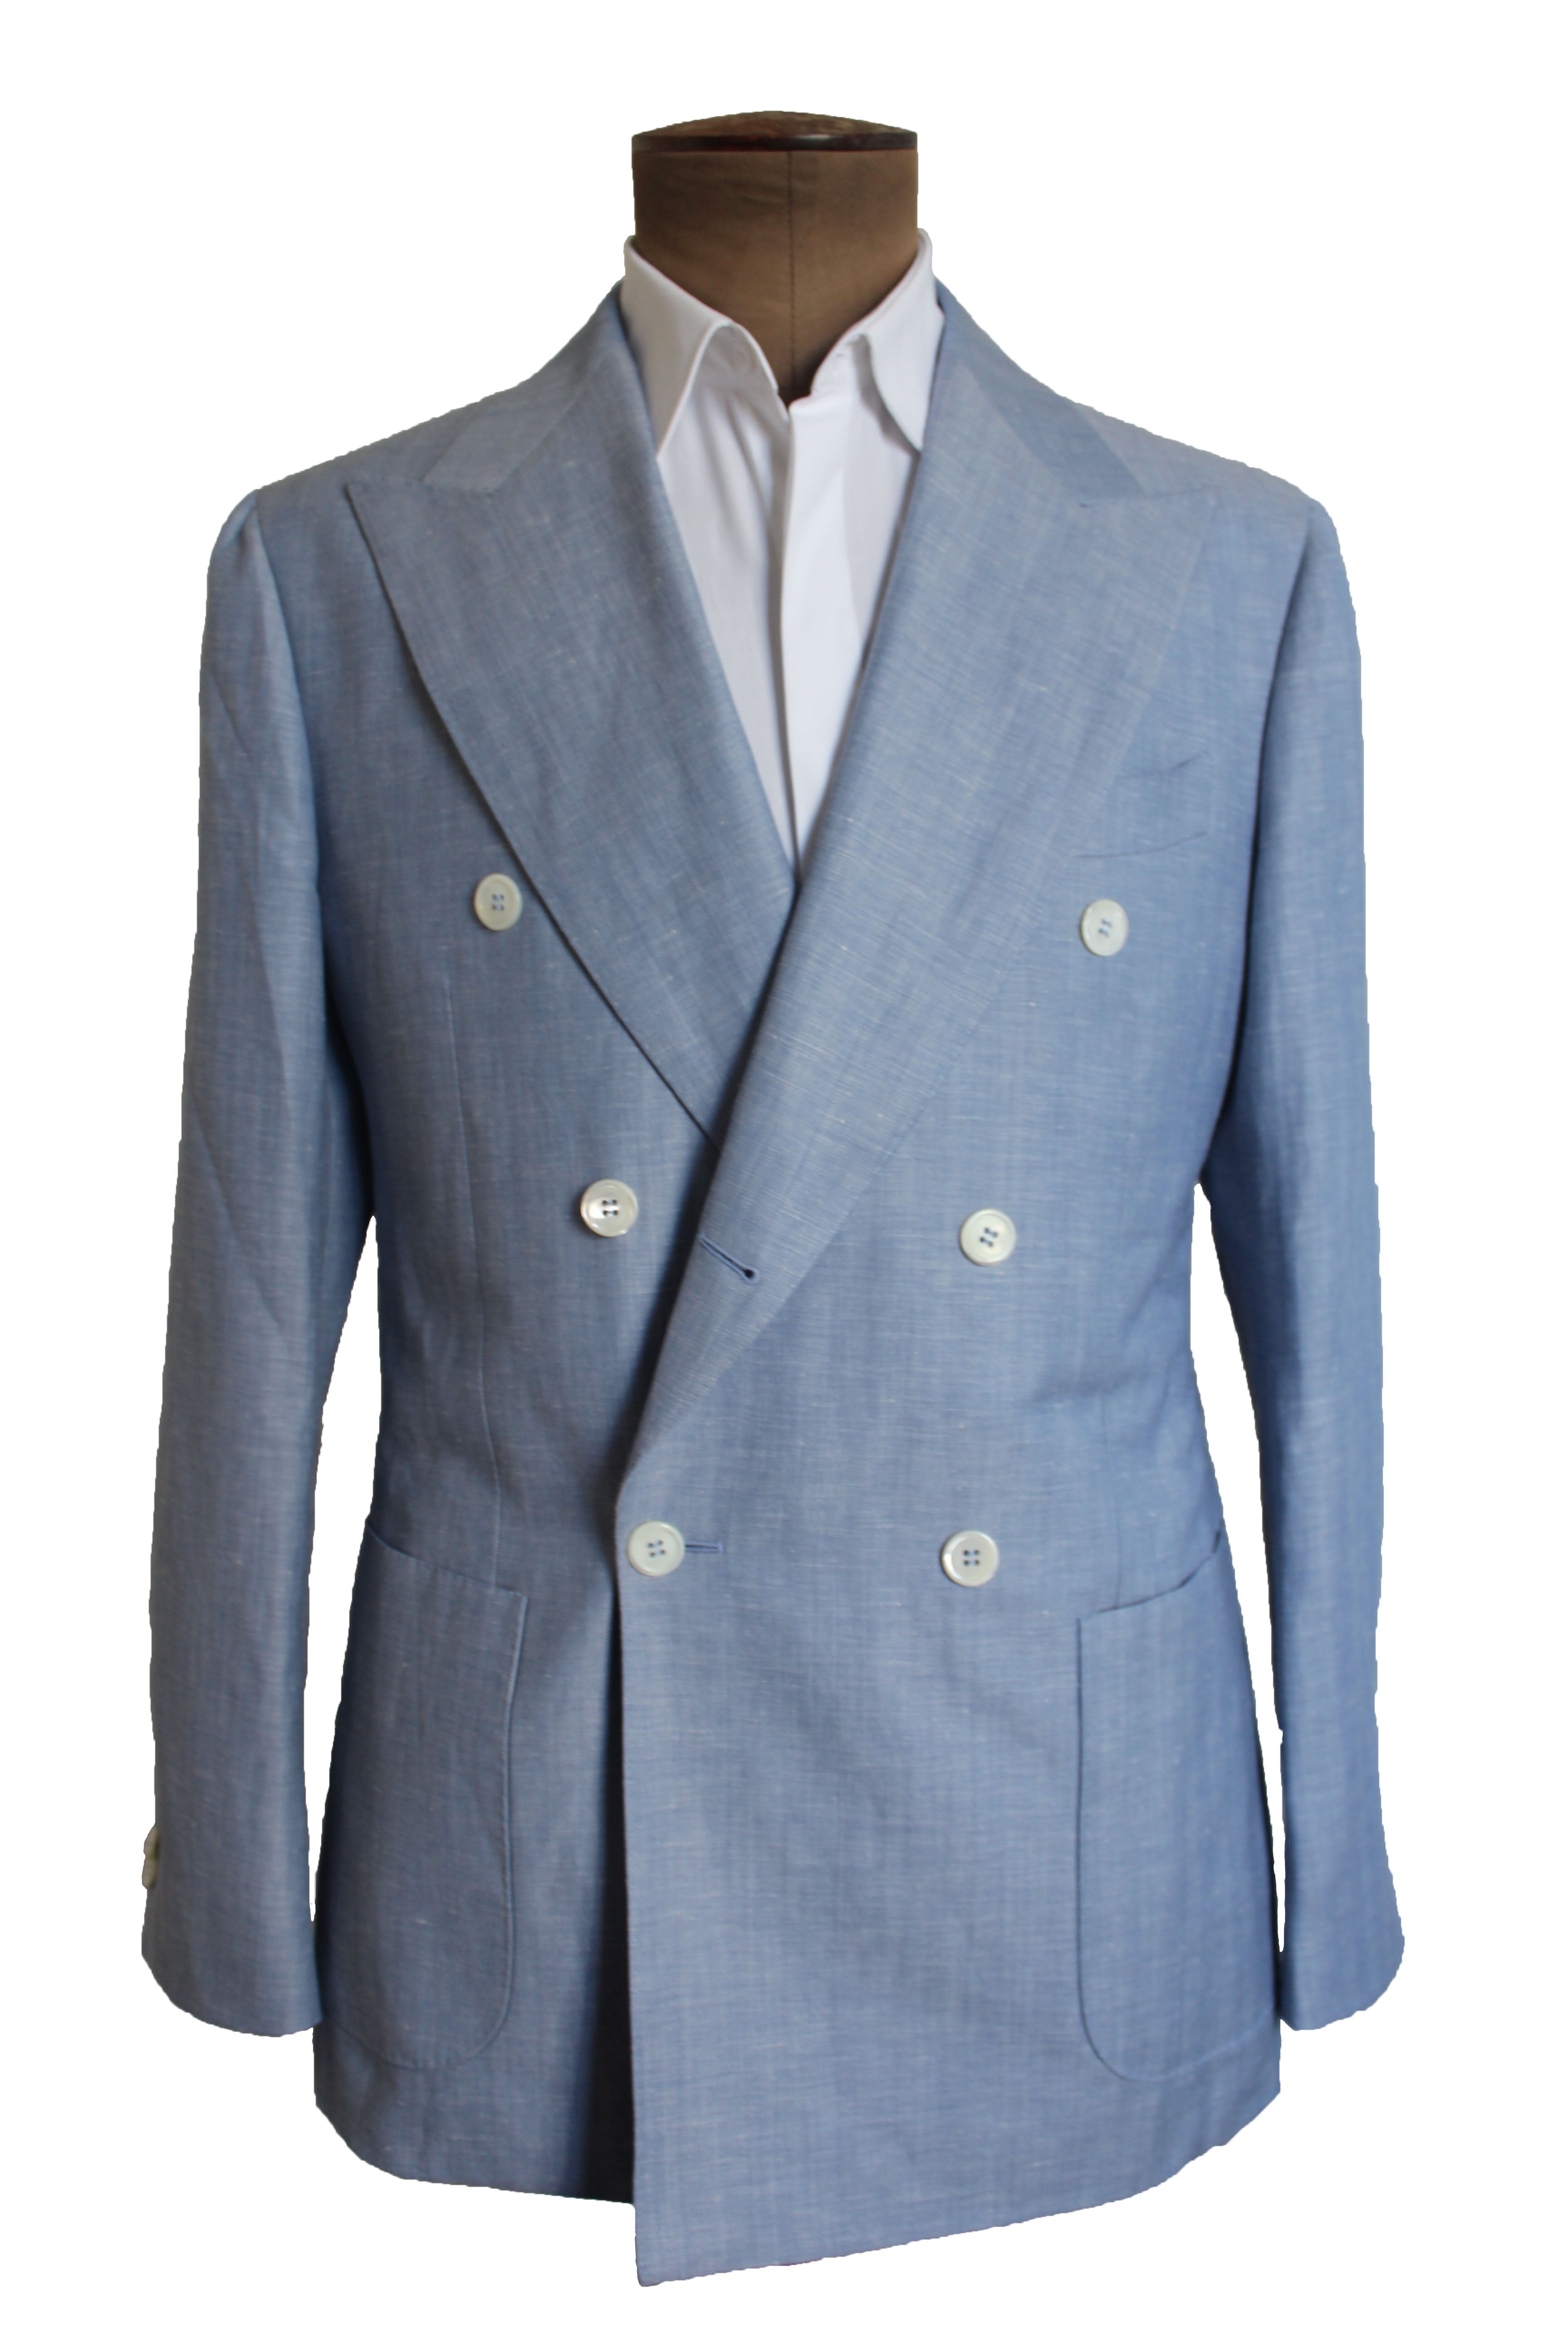 Blue Herringbone Jacket Double Breasted 6 Buttons